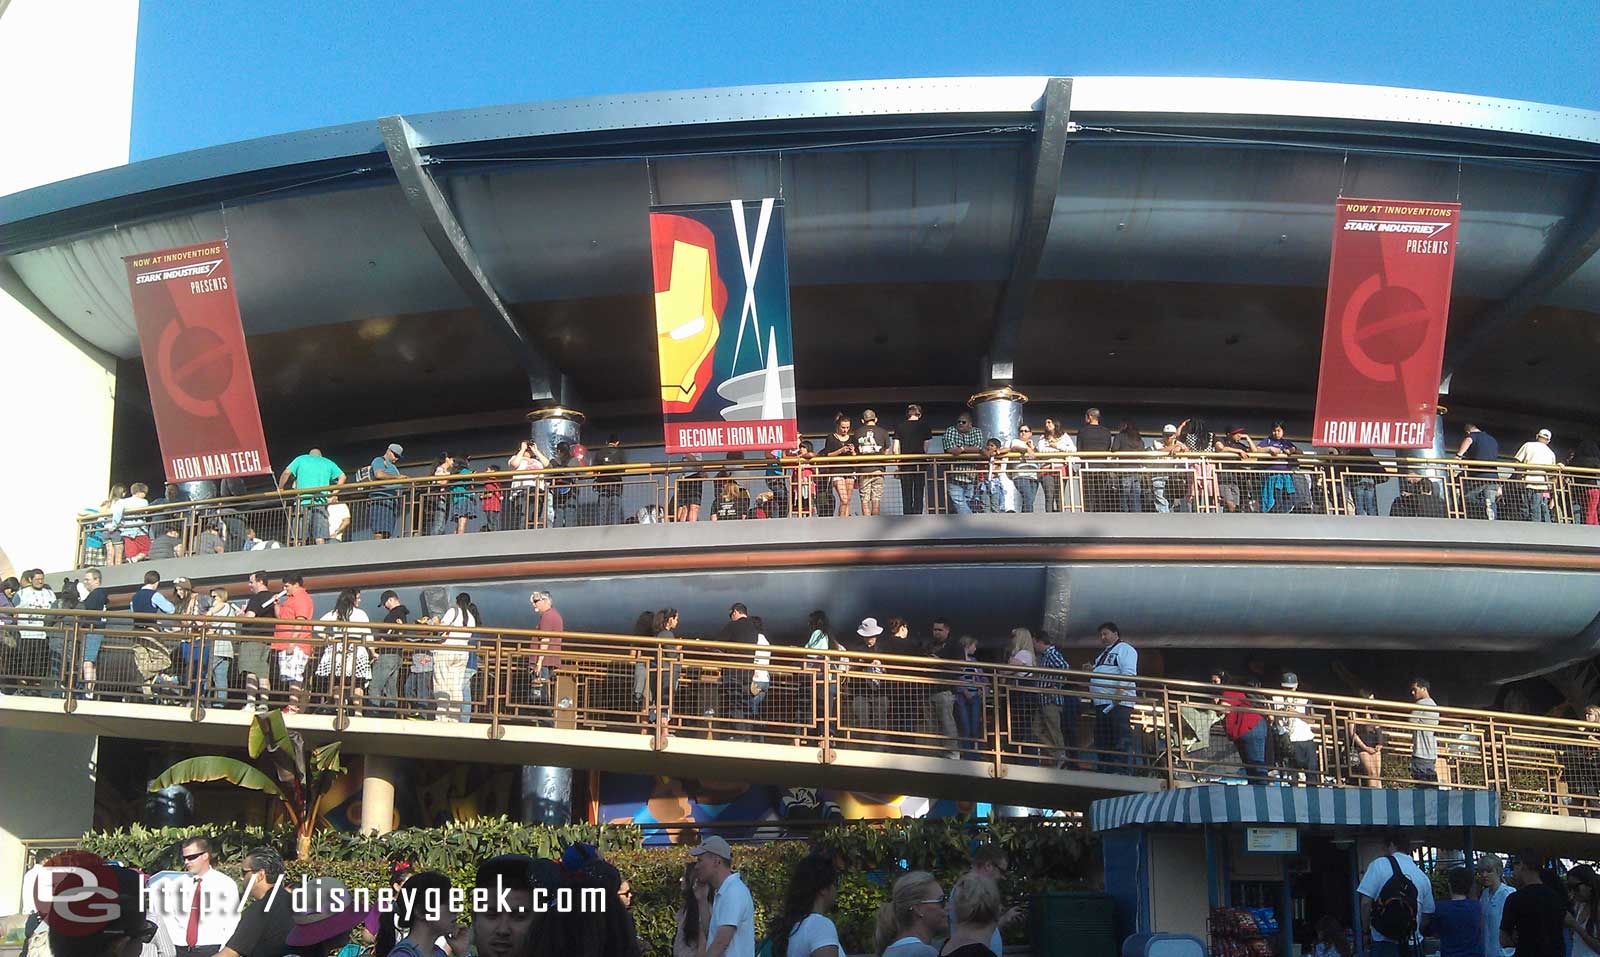 Probably a record setting line to enter Innoventions this evening for the AP preview of the Iron Man 3